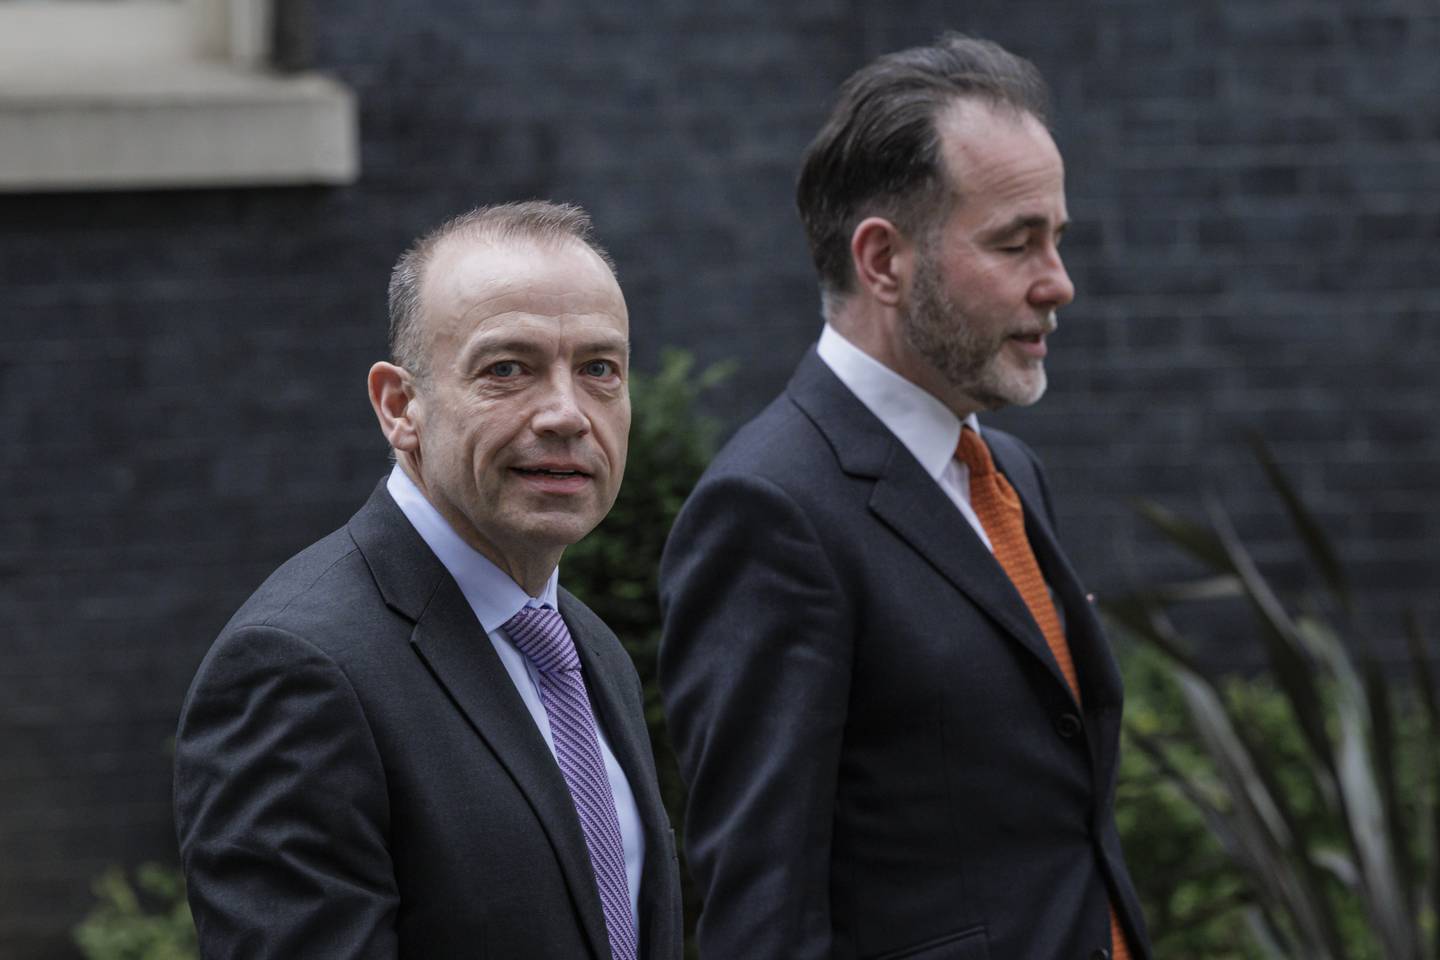 Chirs Pincher, right, was appointed alongside chief whip Chris Heaton-Harris last February to strengthen party discipline. Getty Images